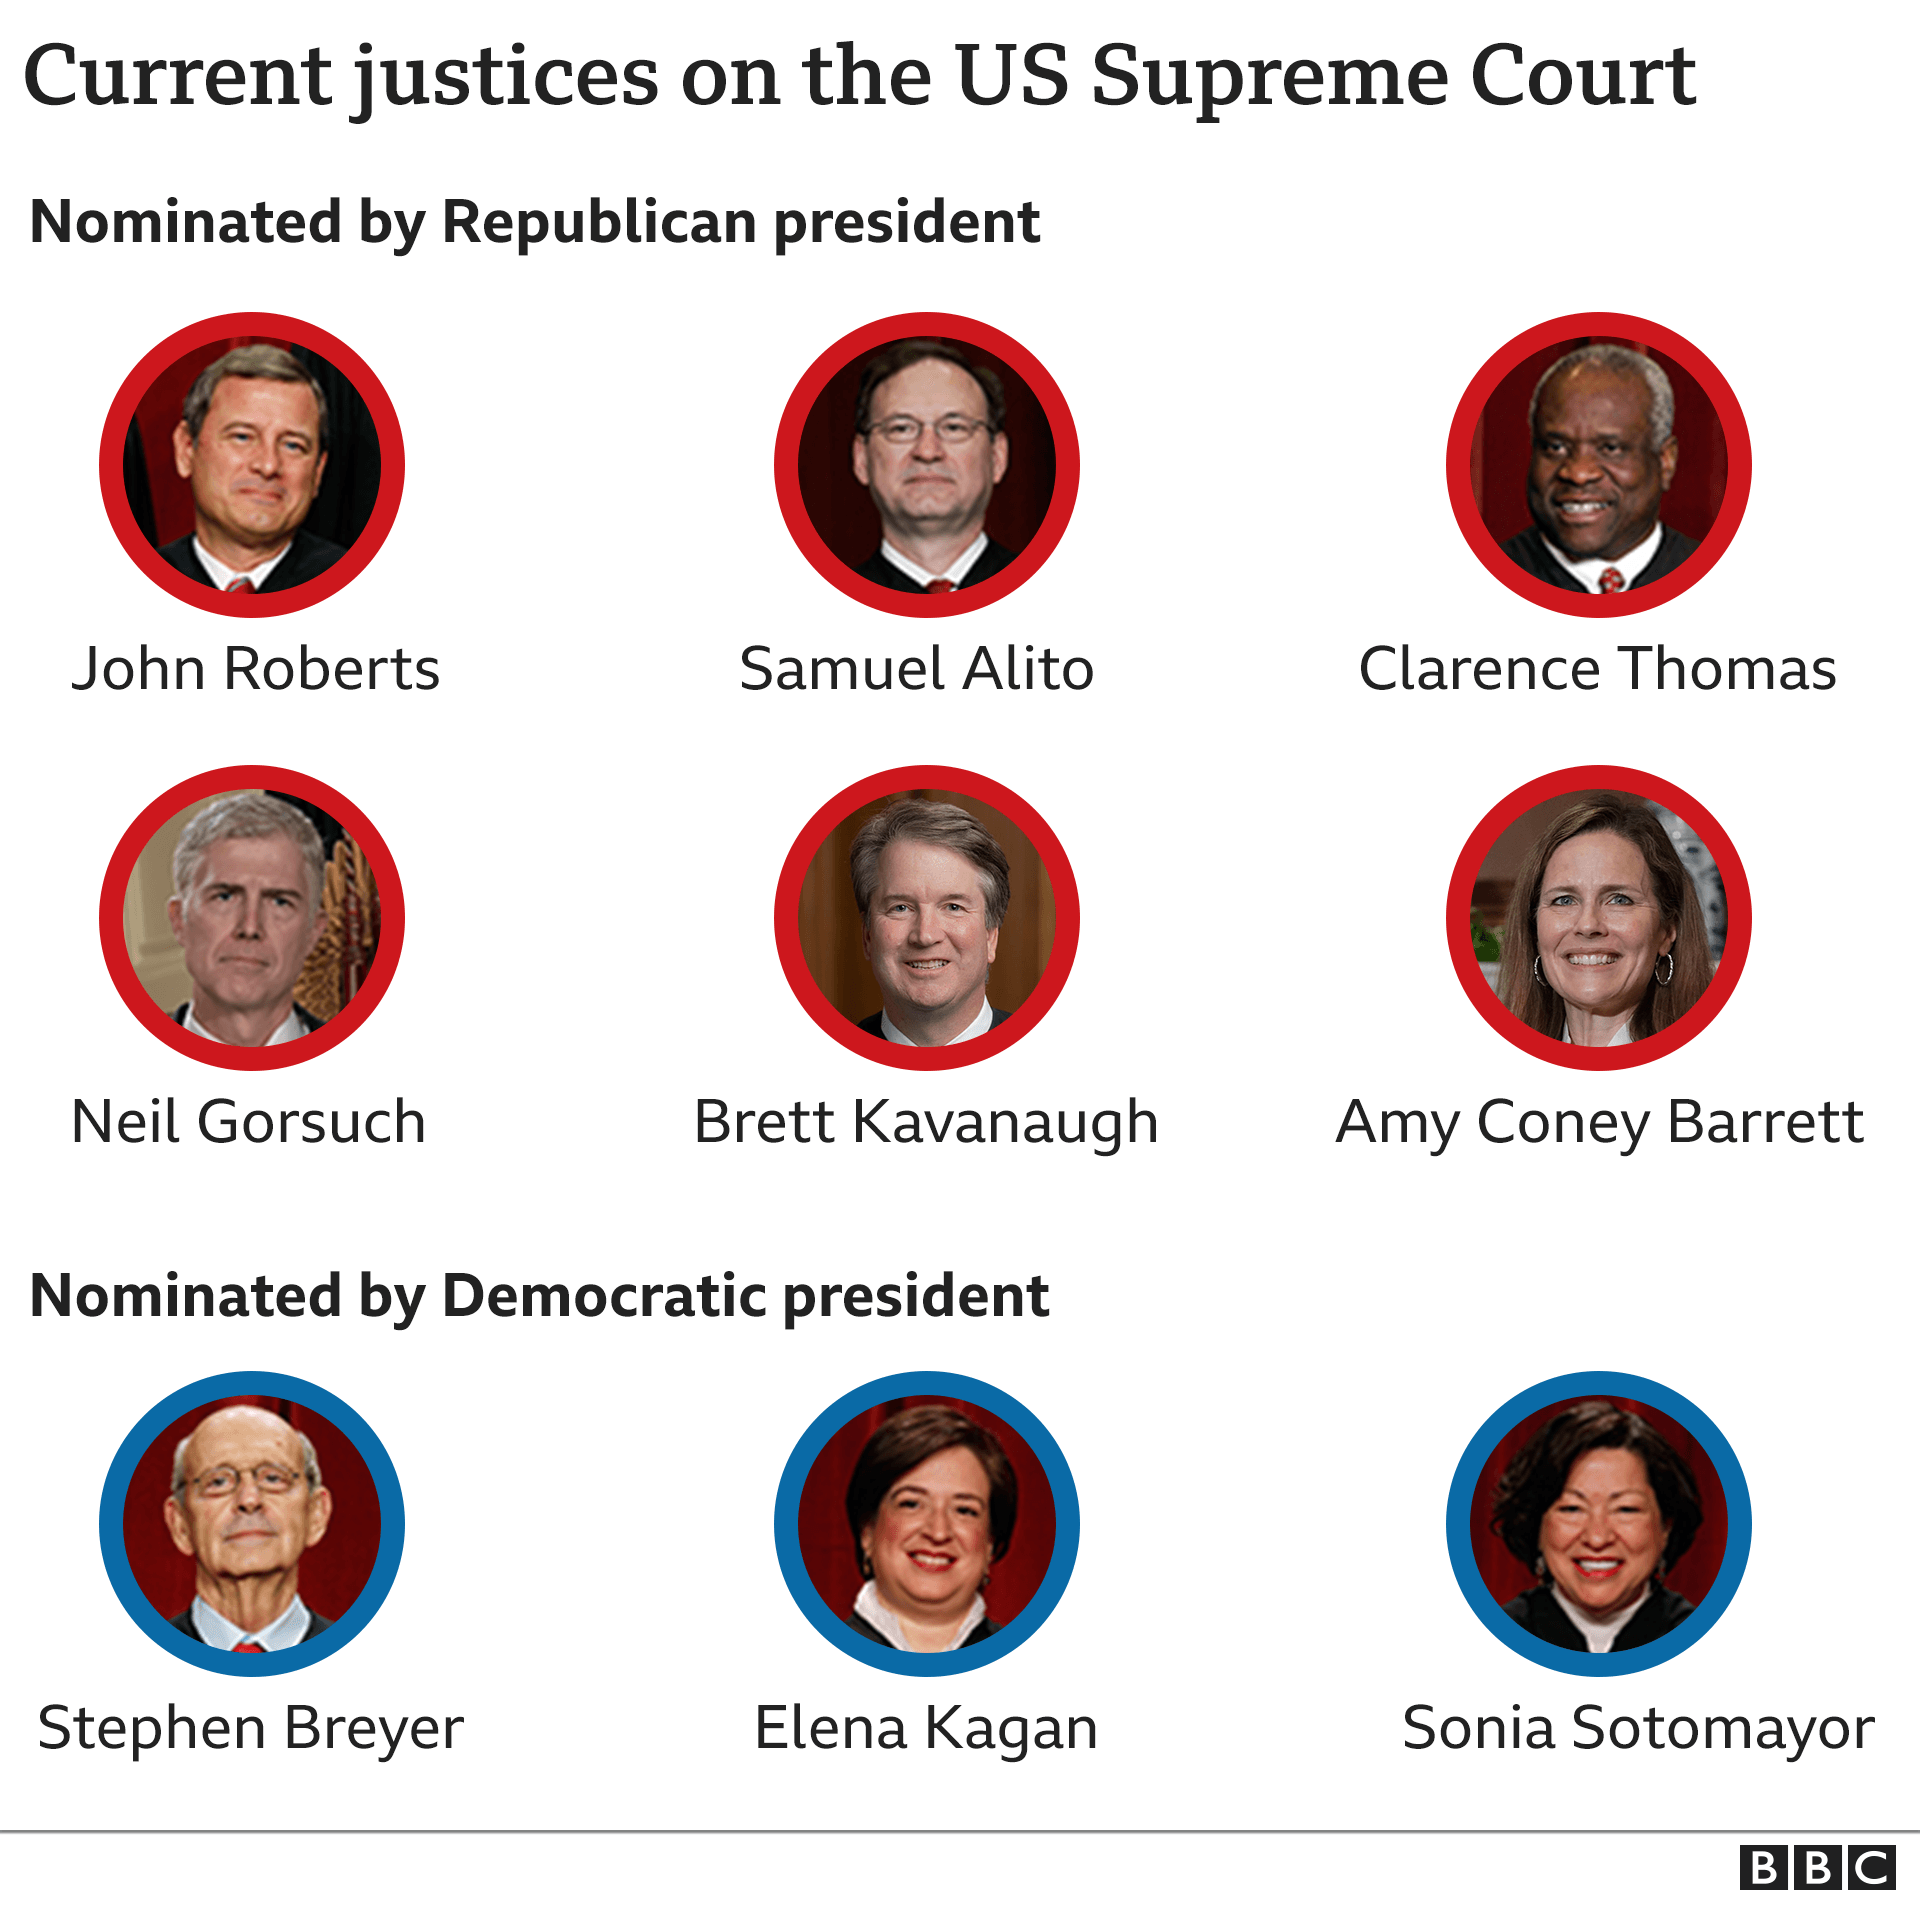 Graphic shows current justices on US Supreme Court